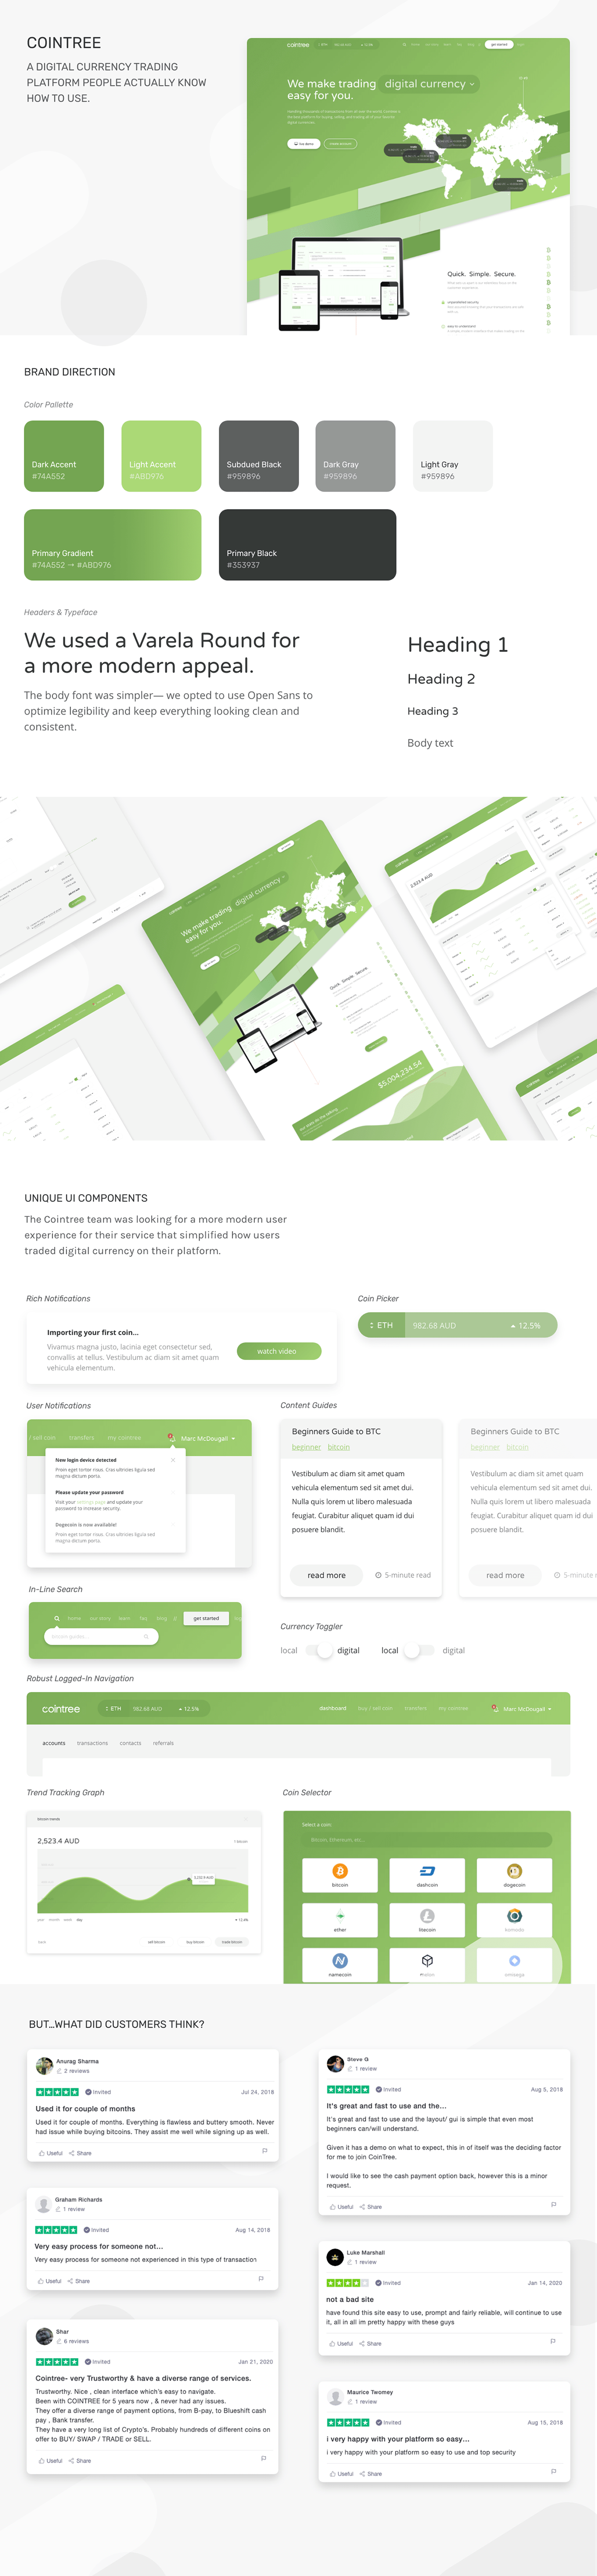 customer discovery design product design  SAAS UI/UX